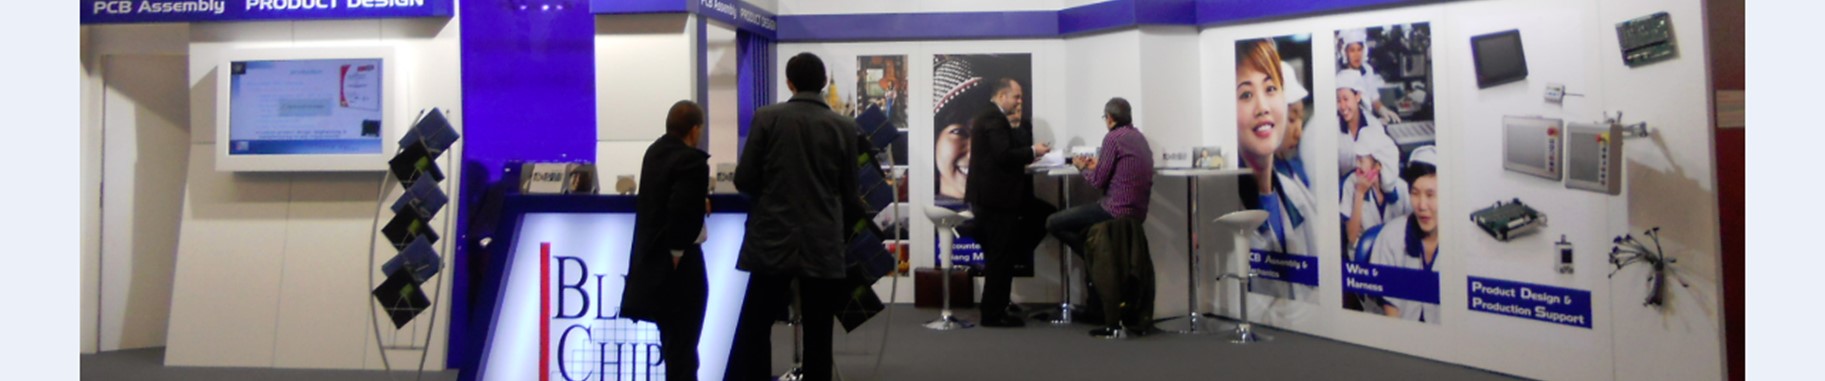 booth_2011.png?center=0.63003663003663,0.4925&amp;mode=crop&amp;quality=90&amp;width=1825&amp;heightratio=0.2082191780821917808219178082&amp;format=jpg&amp;slimmage=true&amp;rnd=130836788160000000